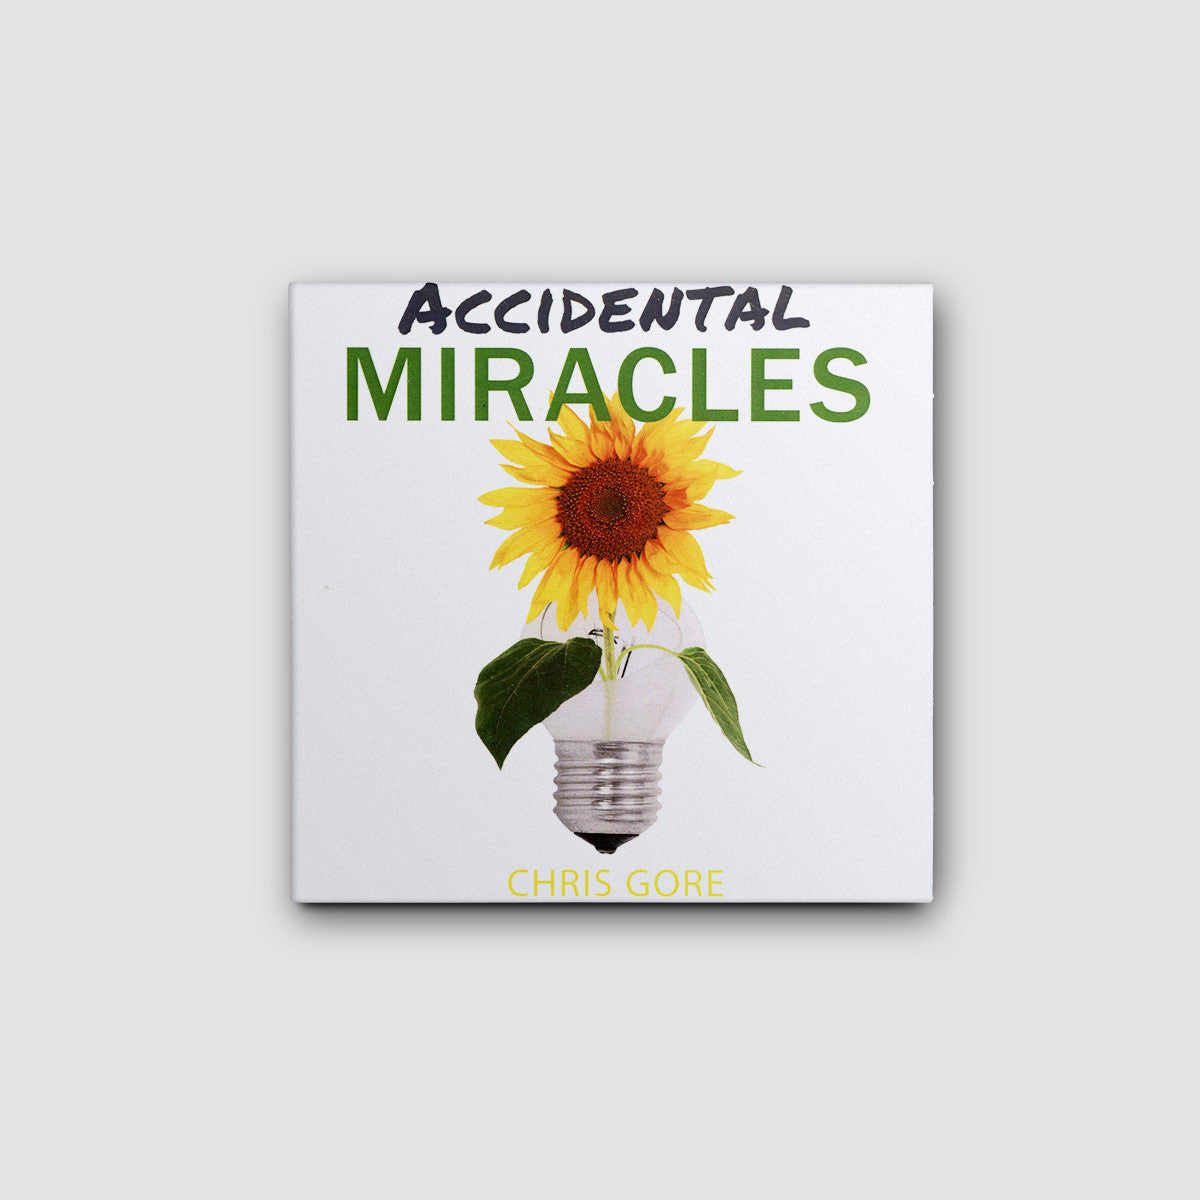 Accidental Miracles